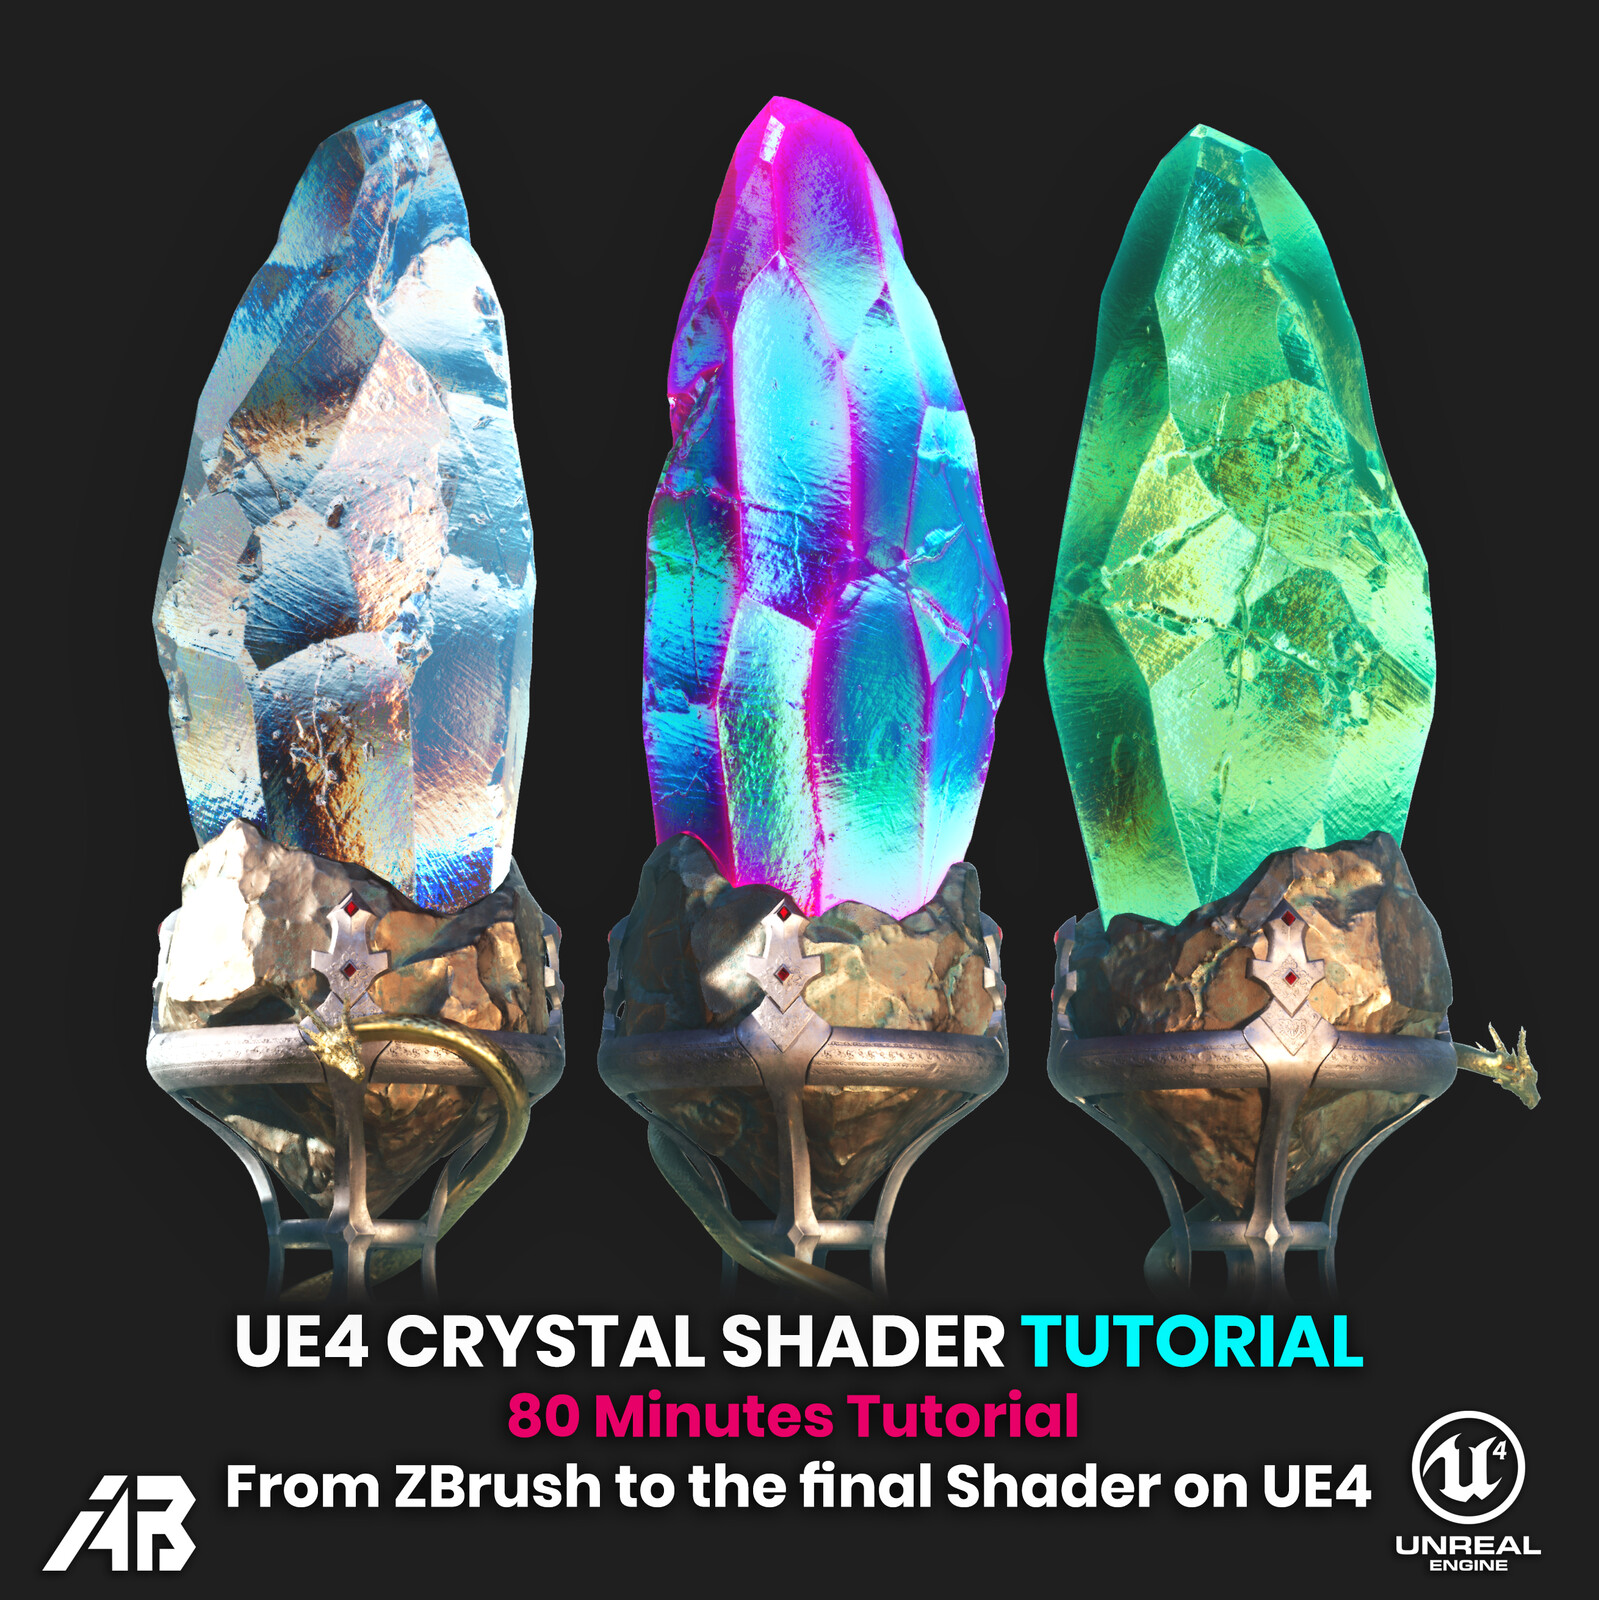 [Tutorial] UE4 Crystal Shader Creation - From ZBrush to the final shader on UE4